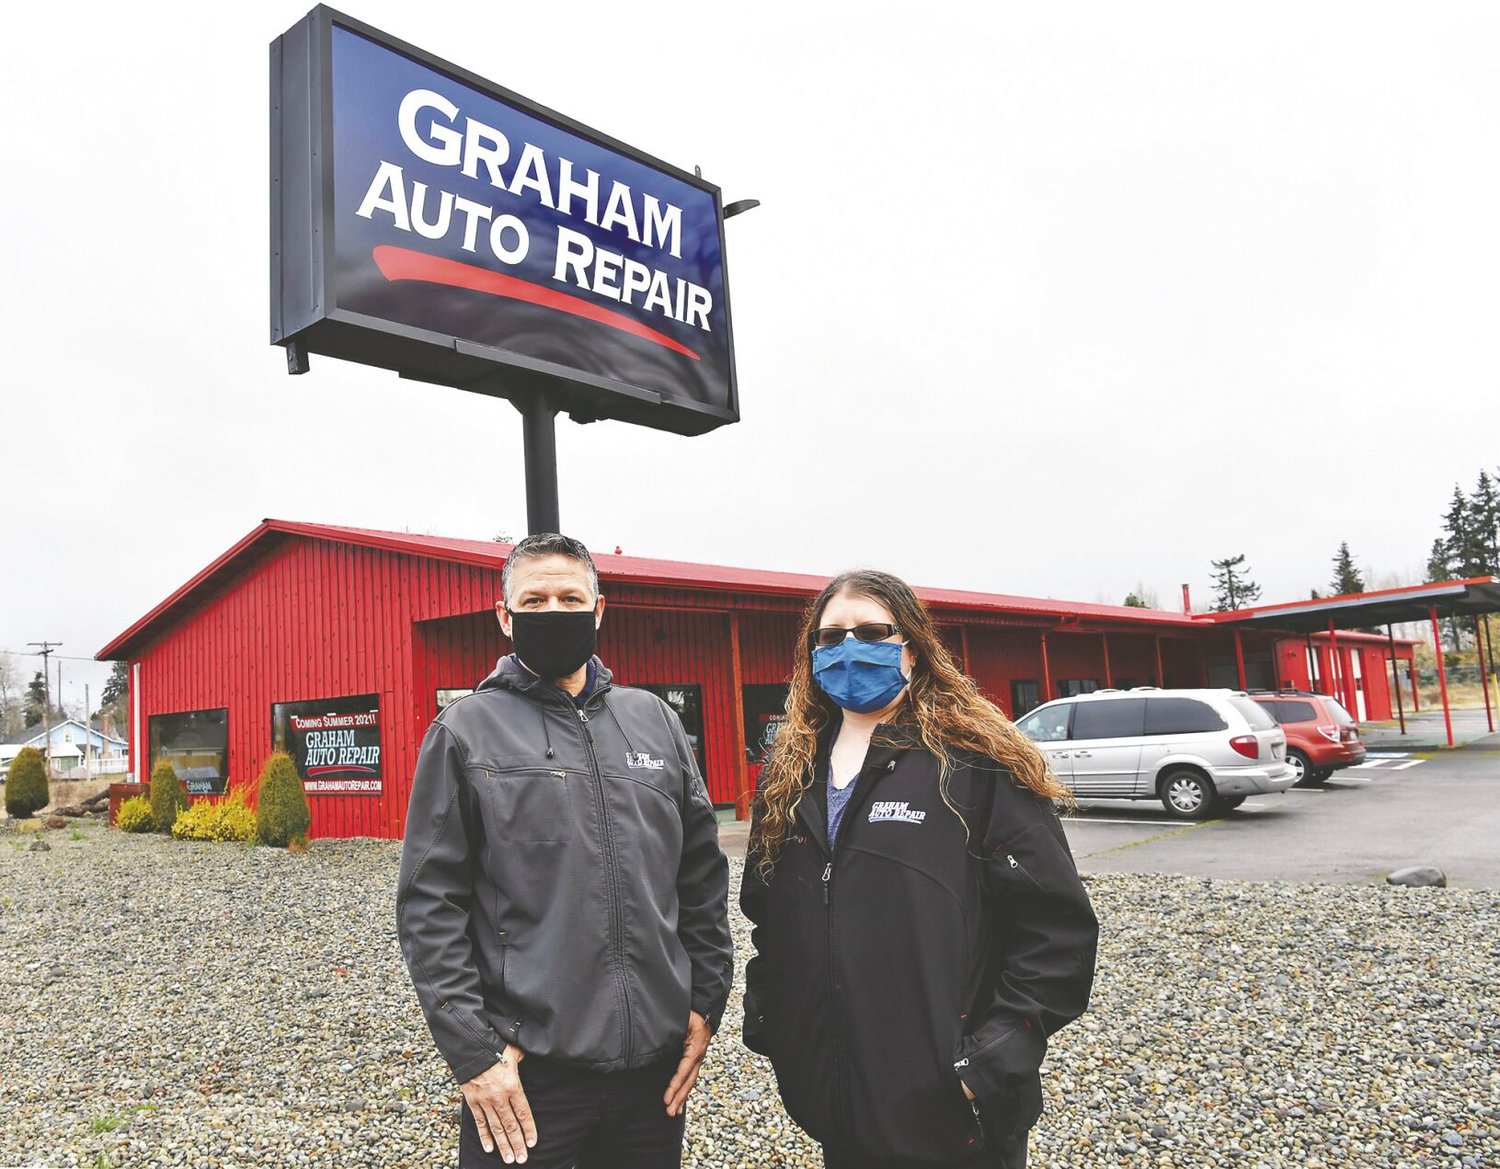 Troy Vaninetti, 49, who with his wife Kori, 47, own Graham Auto Repair in Graham and the soon-to-open Graham Auto Repair in Yelm, and his employee Lacie Ugelstad, 39, the company's digital media and recruiting manager, will work with others to renovate the former Mattress Ranch facility so that it can open possibly in September. Vaninetti and Ugelstad are seen here at the new facility on Yelm Avenue East on Thursday, March 25.